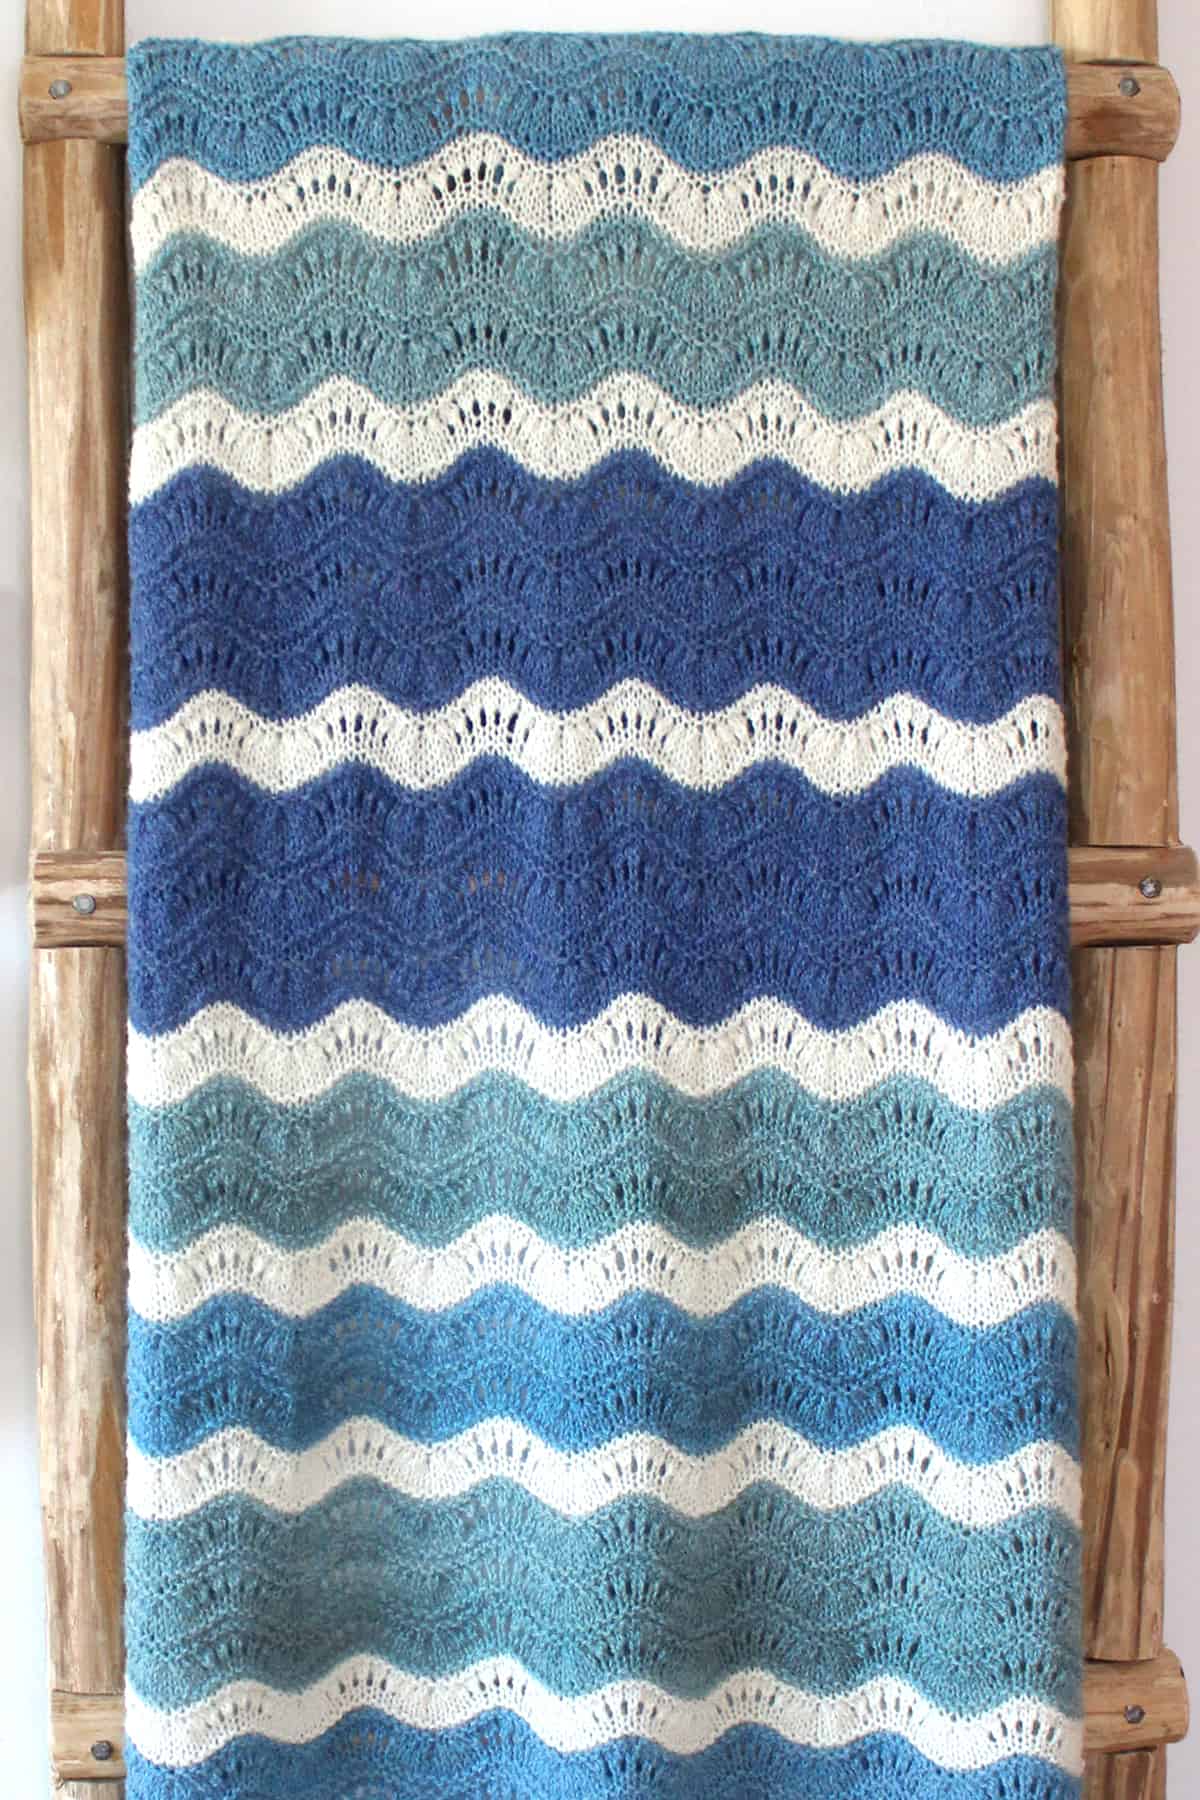 Ripple lace blanket knitted in shades of blue and white displayed on a wooden ladder.